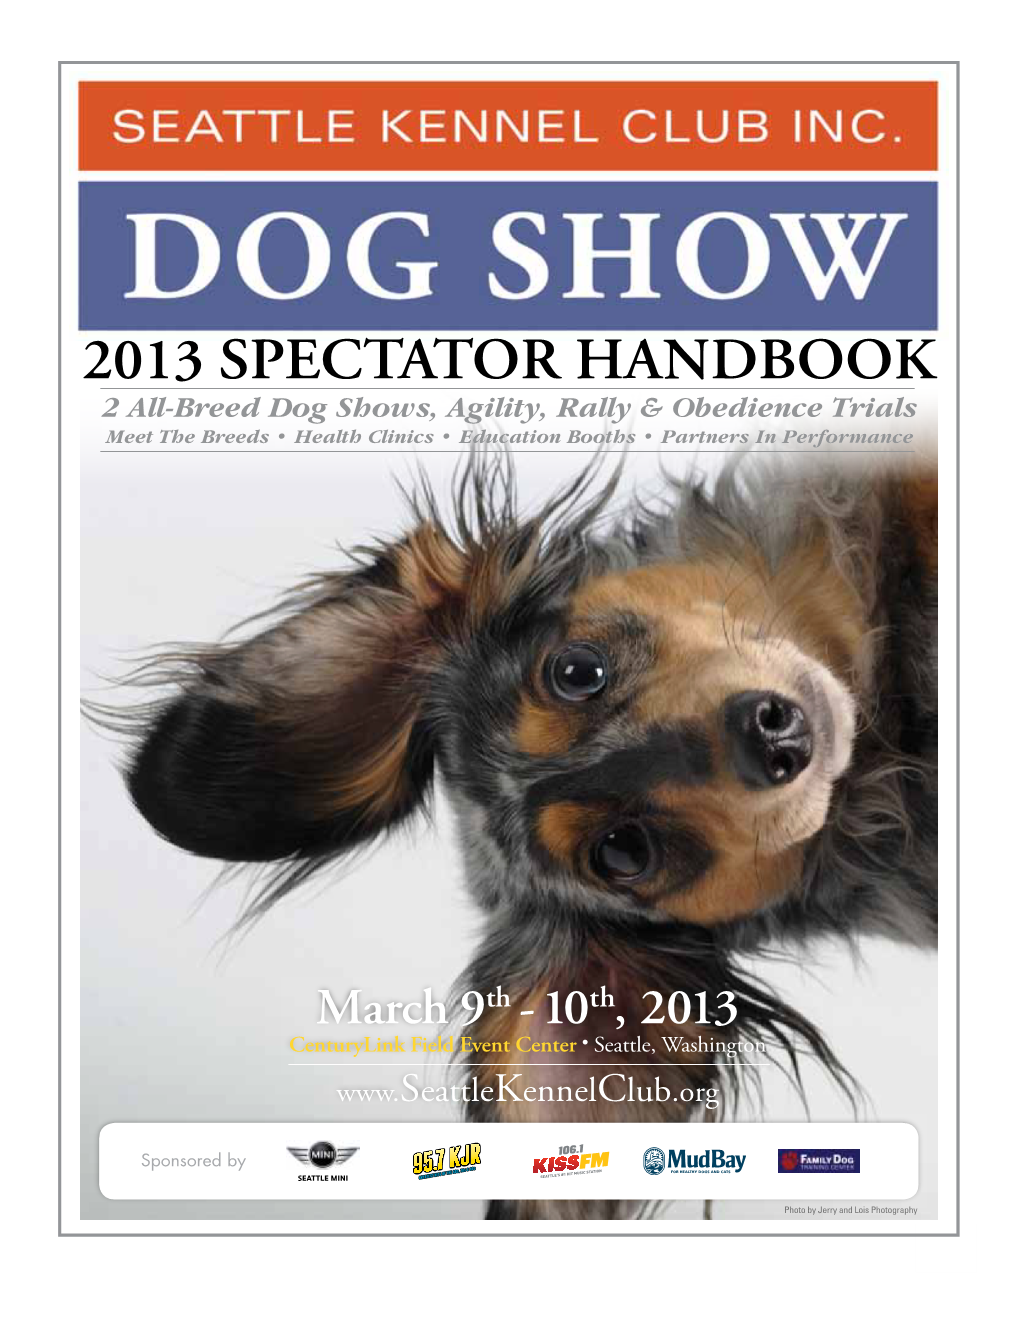 2013 SPECTATOR HANDBOOK 2 All-Breed Dog Shows, Agility, Rally & Obedience Trials Meet the Breeds • Health Clinics • Education Booths • Partners in Performance